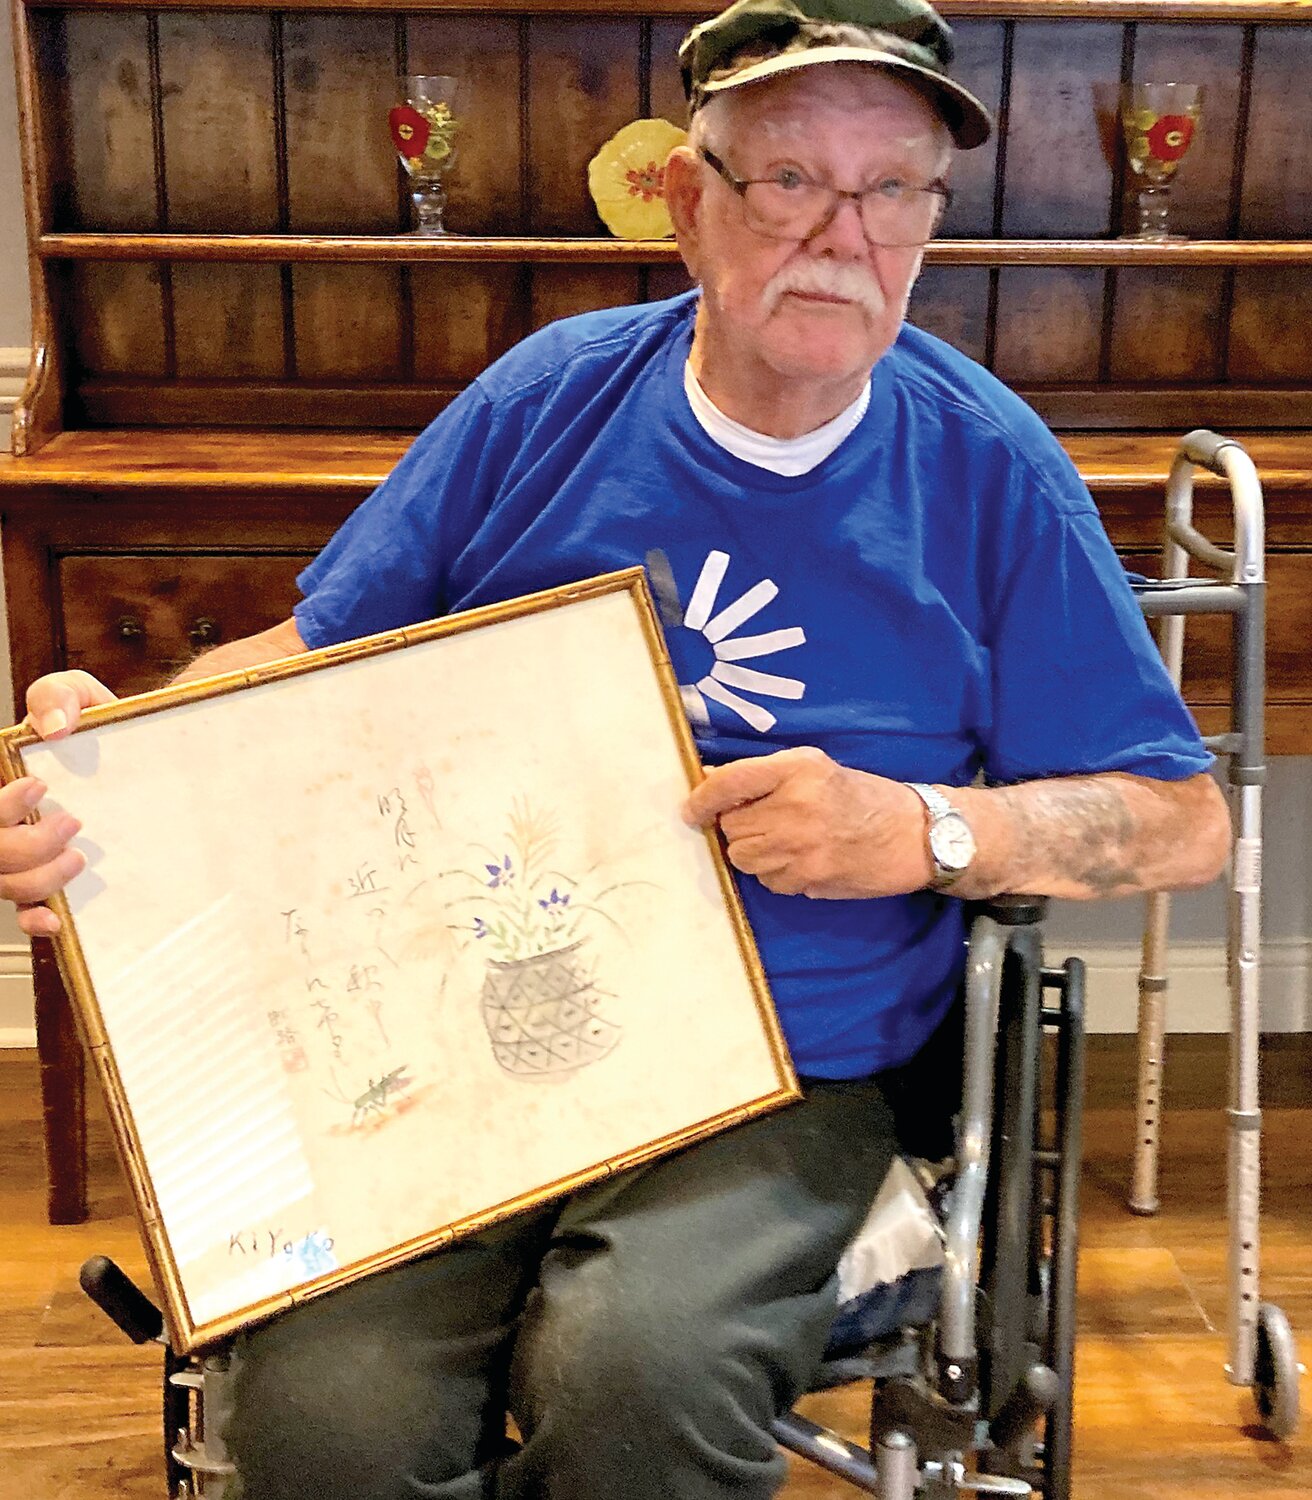 John Brenton, a U.S. Army WWII veteran, holds a piece of artwork in which a Japanese captured soldier secretly returned money stolen from American Marines killed in combat. Brenton served in Saipan, in the western Pacific, as an infantry soldier from 1943 to 1945.